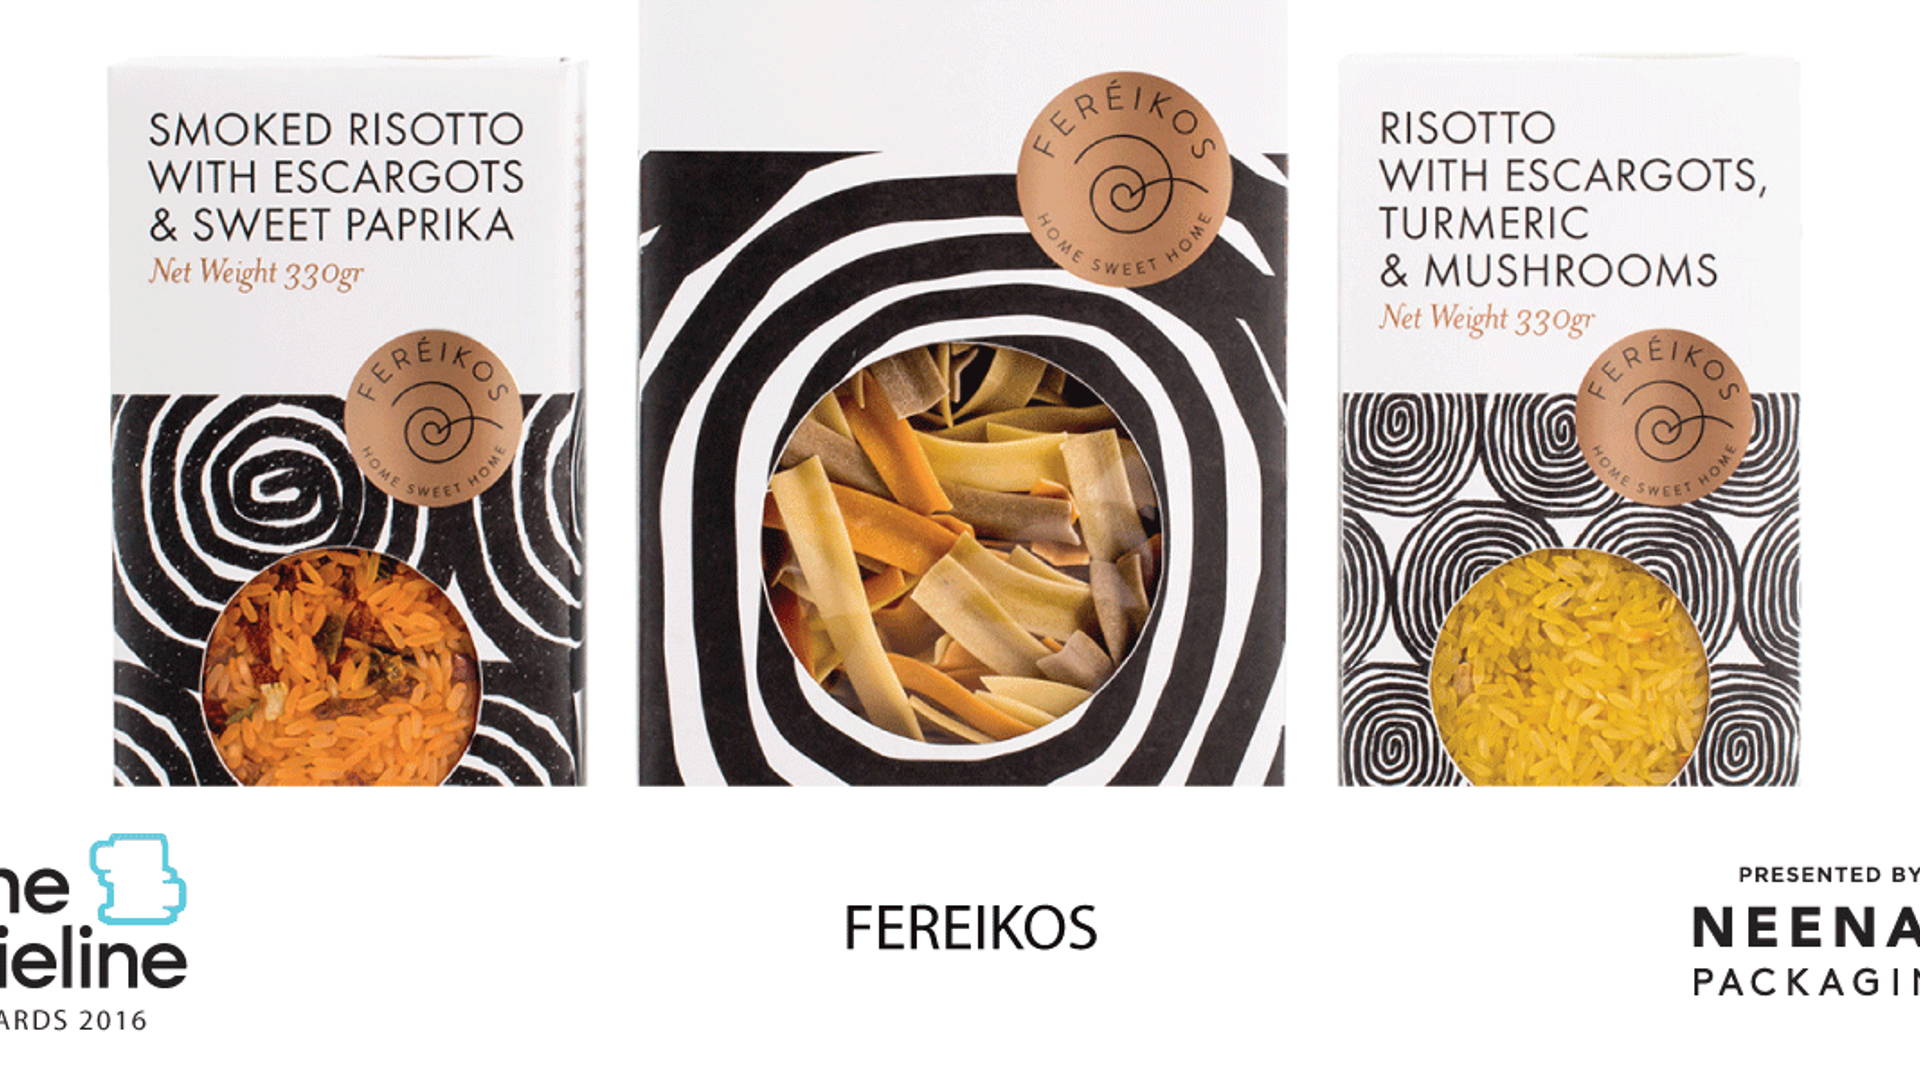 Featured image for The Dieline Award 2016 Outstanding Achievements: FEREIKOS